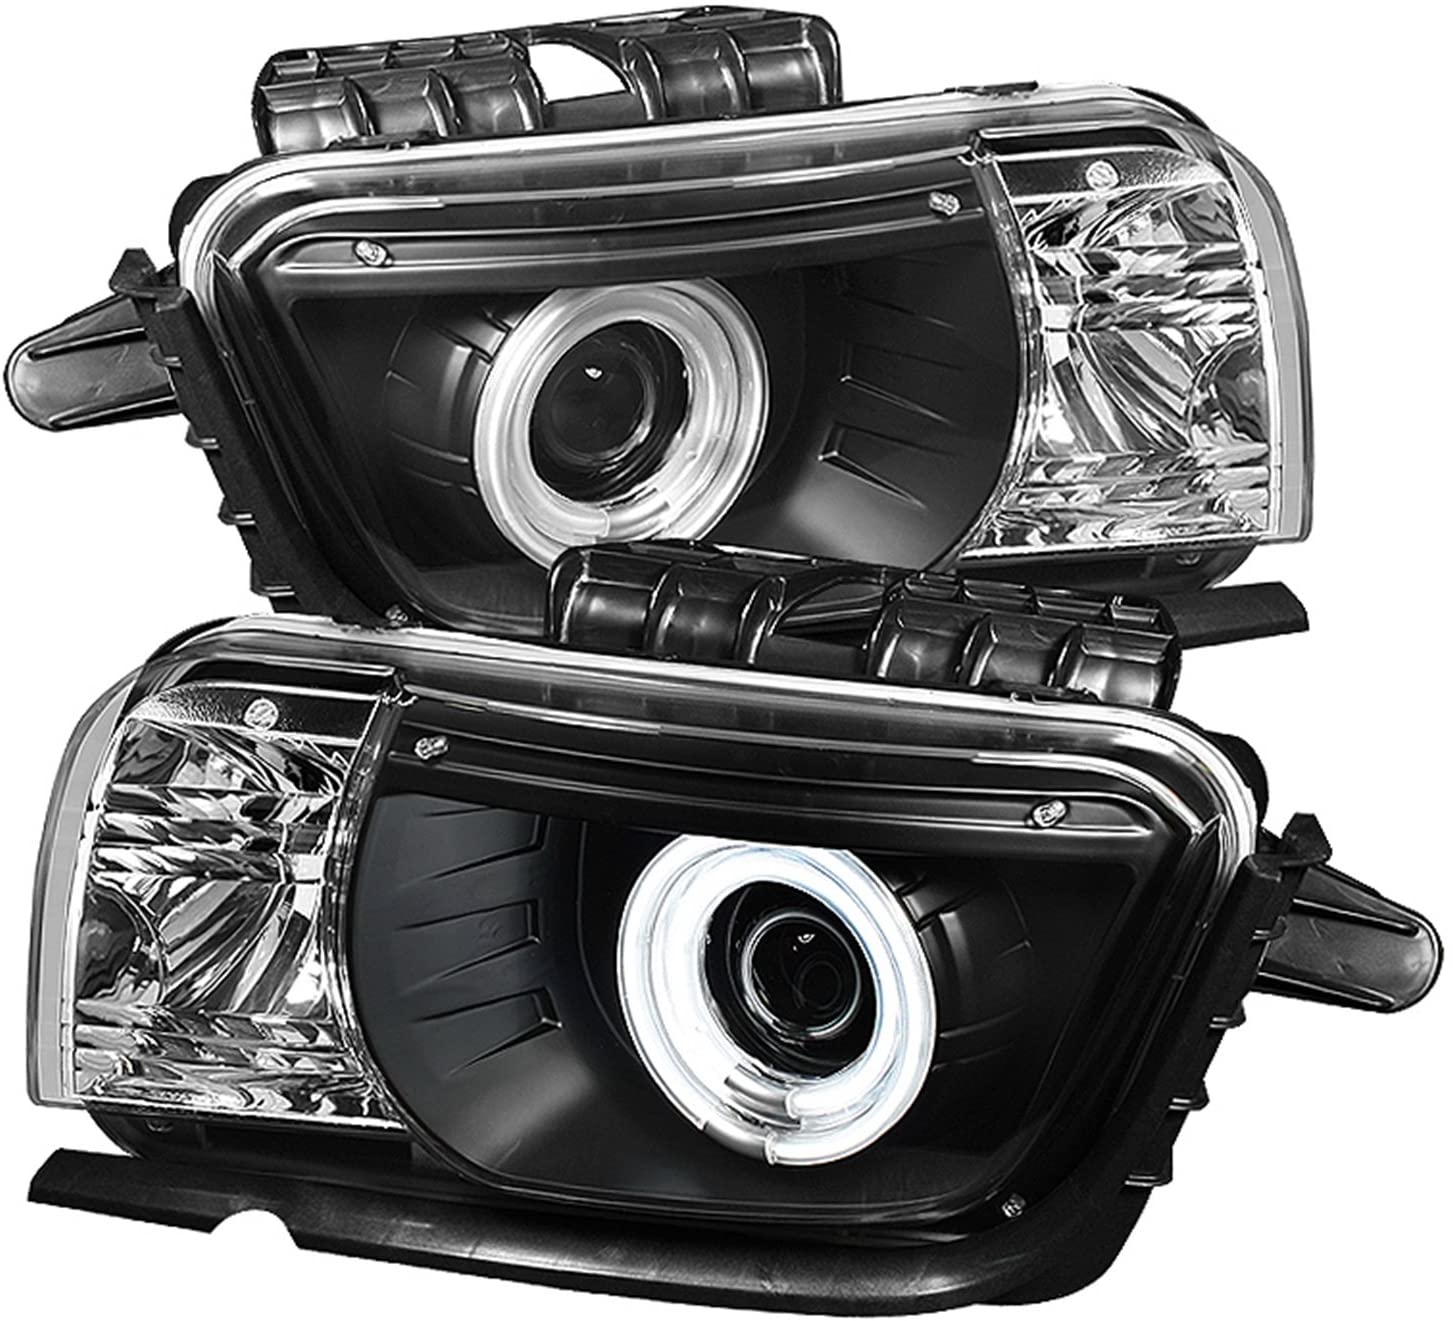 Spyder 5042354 Chevy Camaro 10-13 Projector Headlights (for halogen models only) Dual Halo - CCFL Halo - Black - High/Low H7 (Included) (Black)